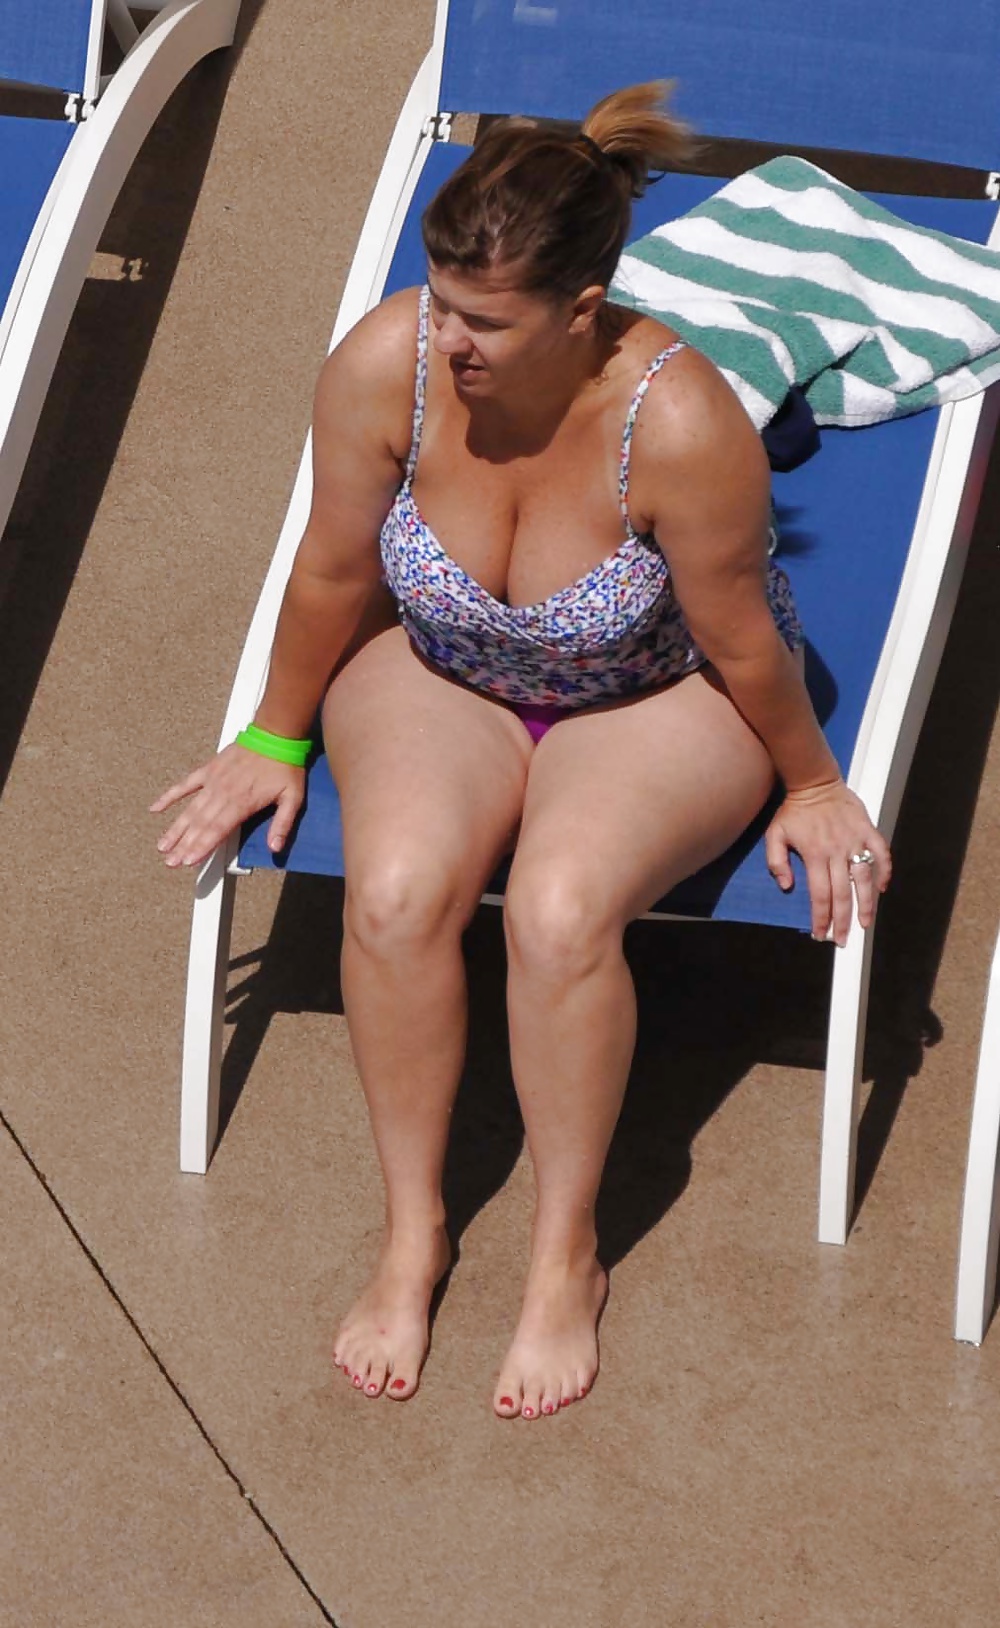 Candid MILF Mom Fat Tits Ass by Pool #39786415